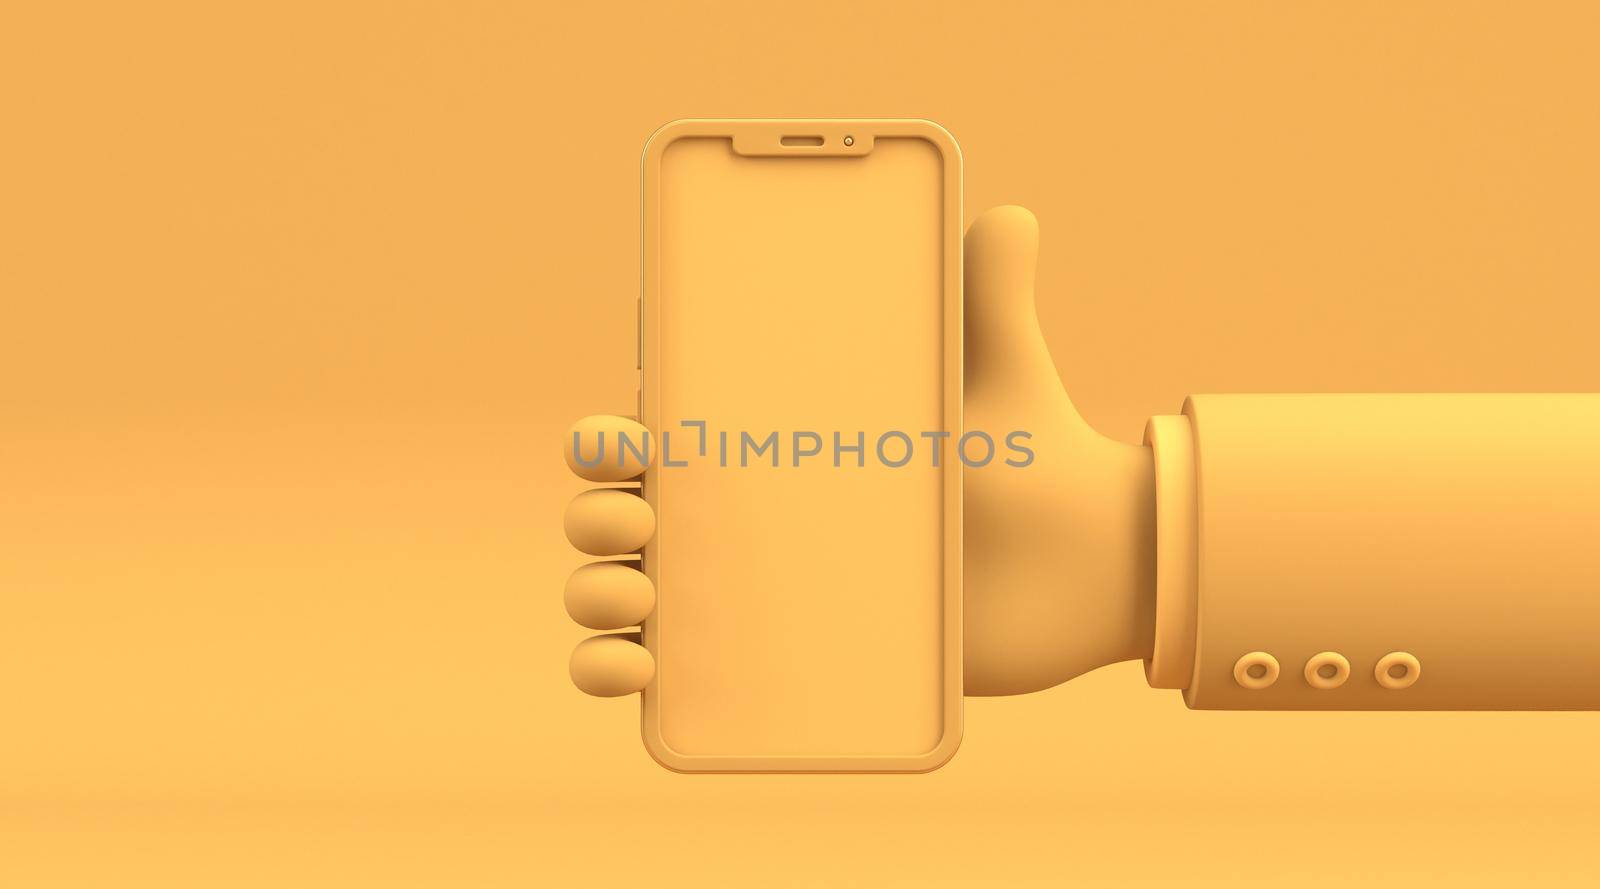 Hand holding smartphone 3D rendering illustration isolated on yellow background